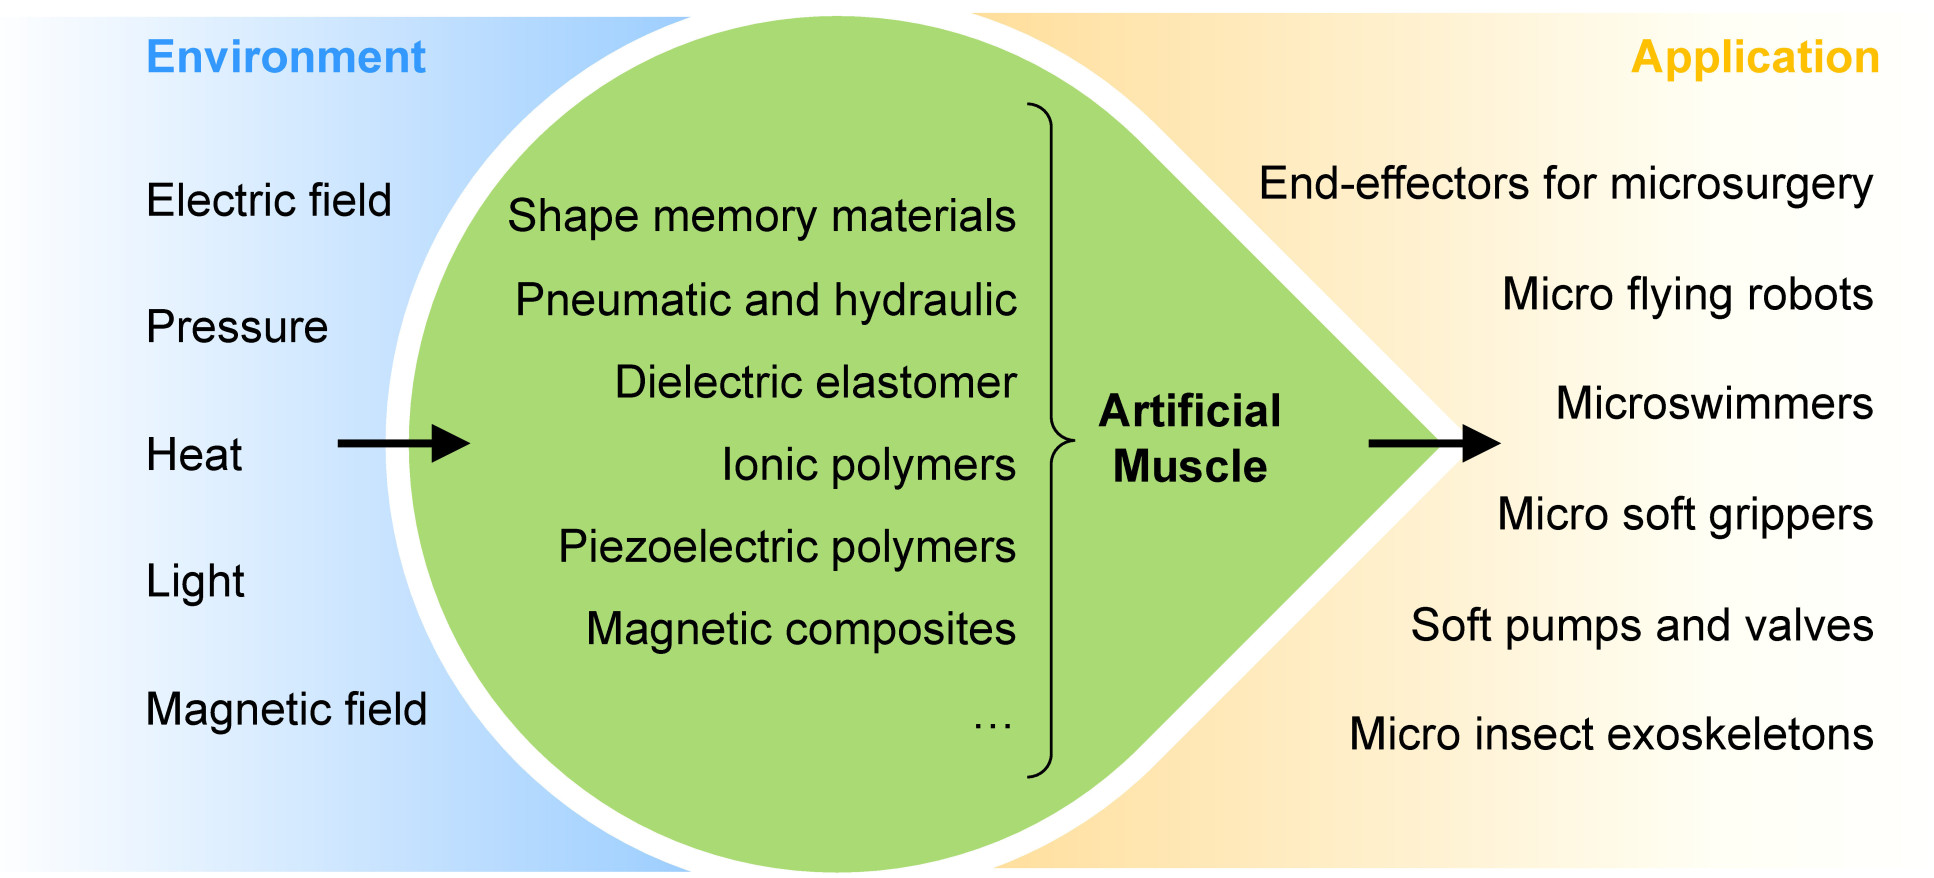 Artificial muscles for microsystem applications